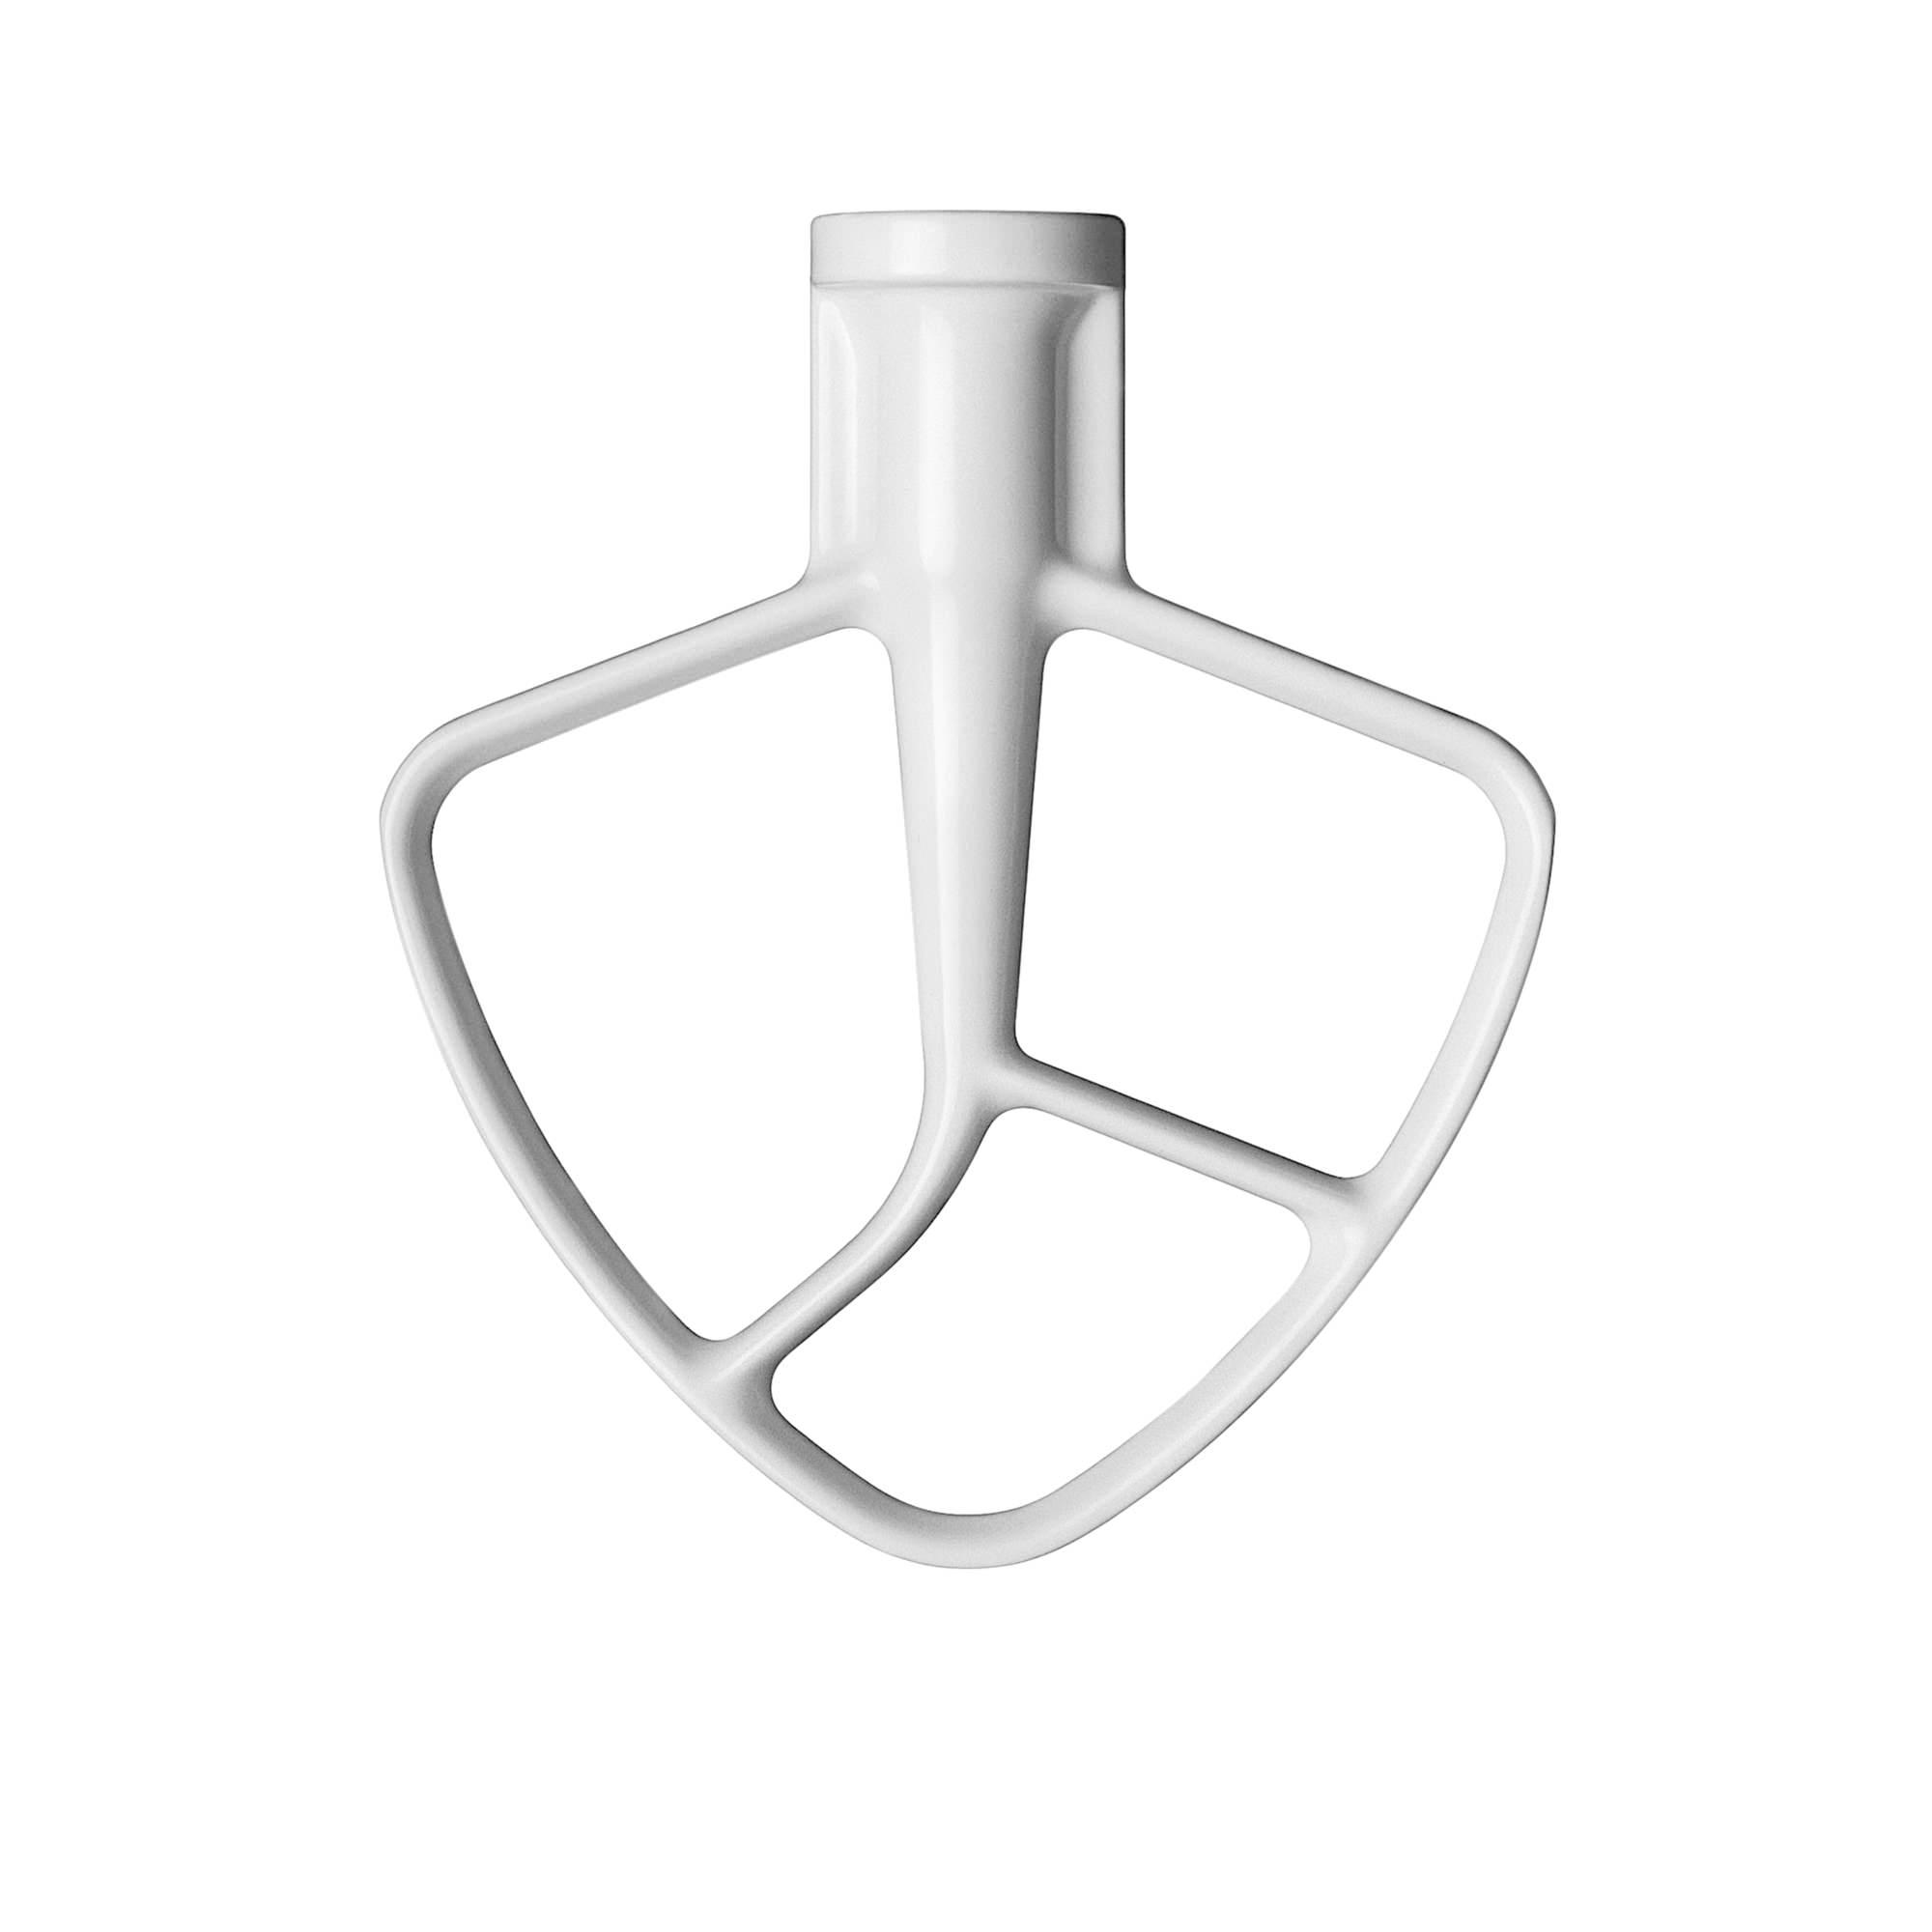 KitchenAid Coated Flat Beater for Tilt-Head Stand Mixer Image 1